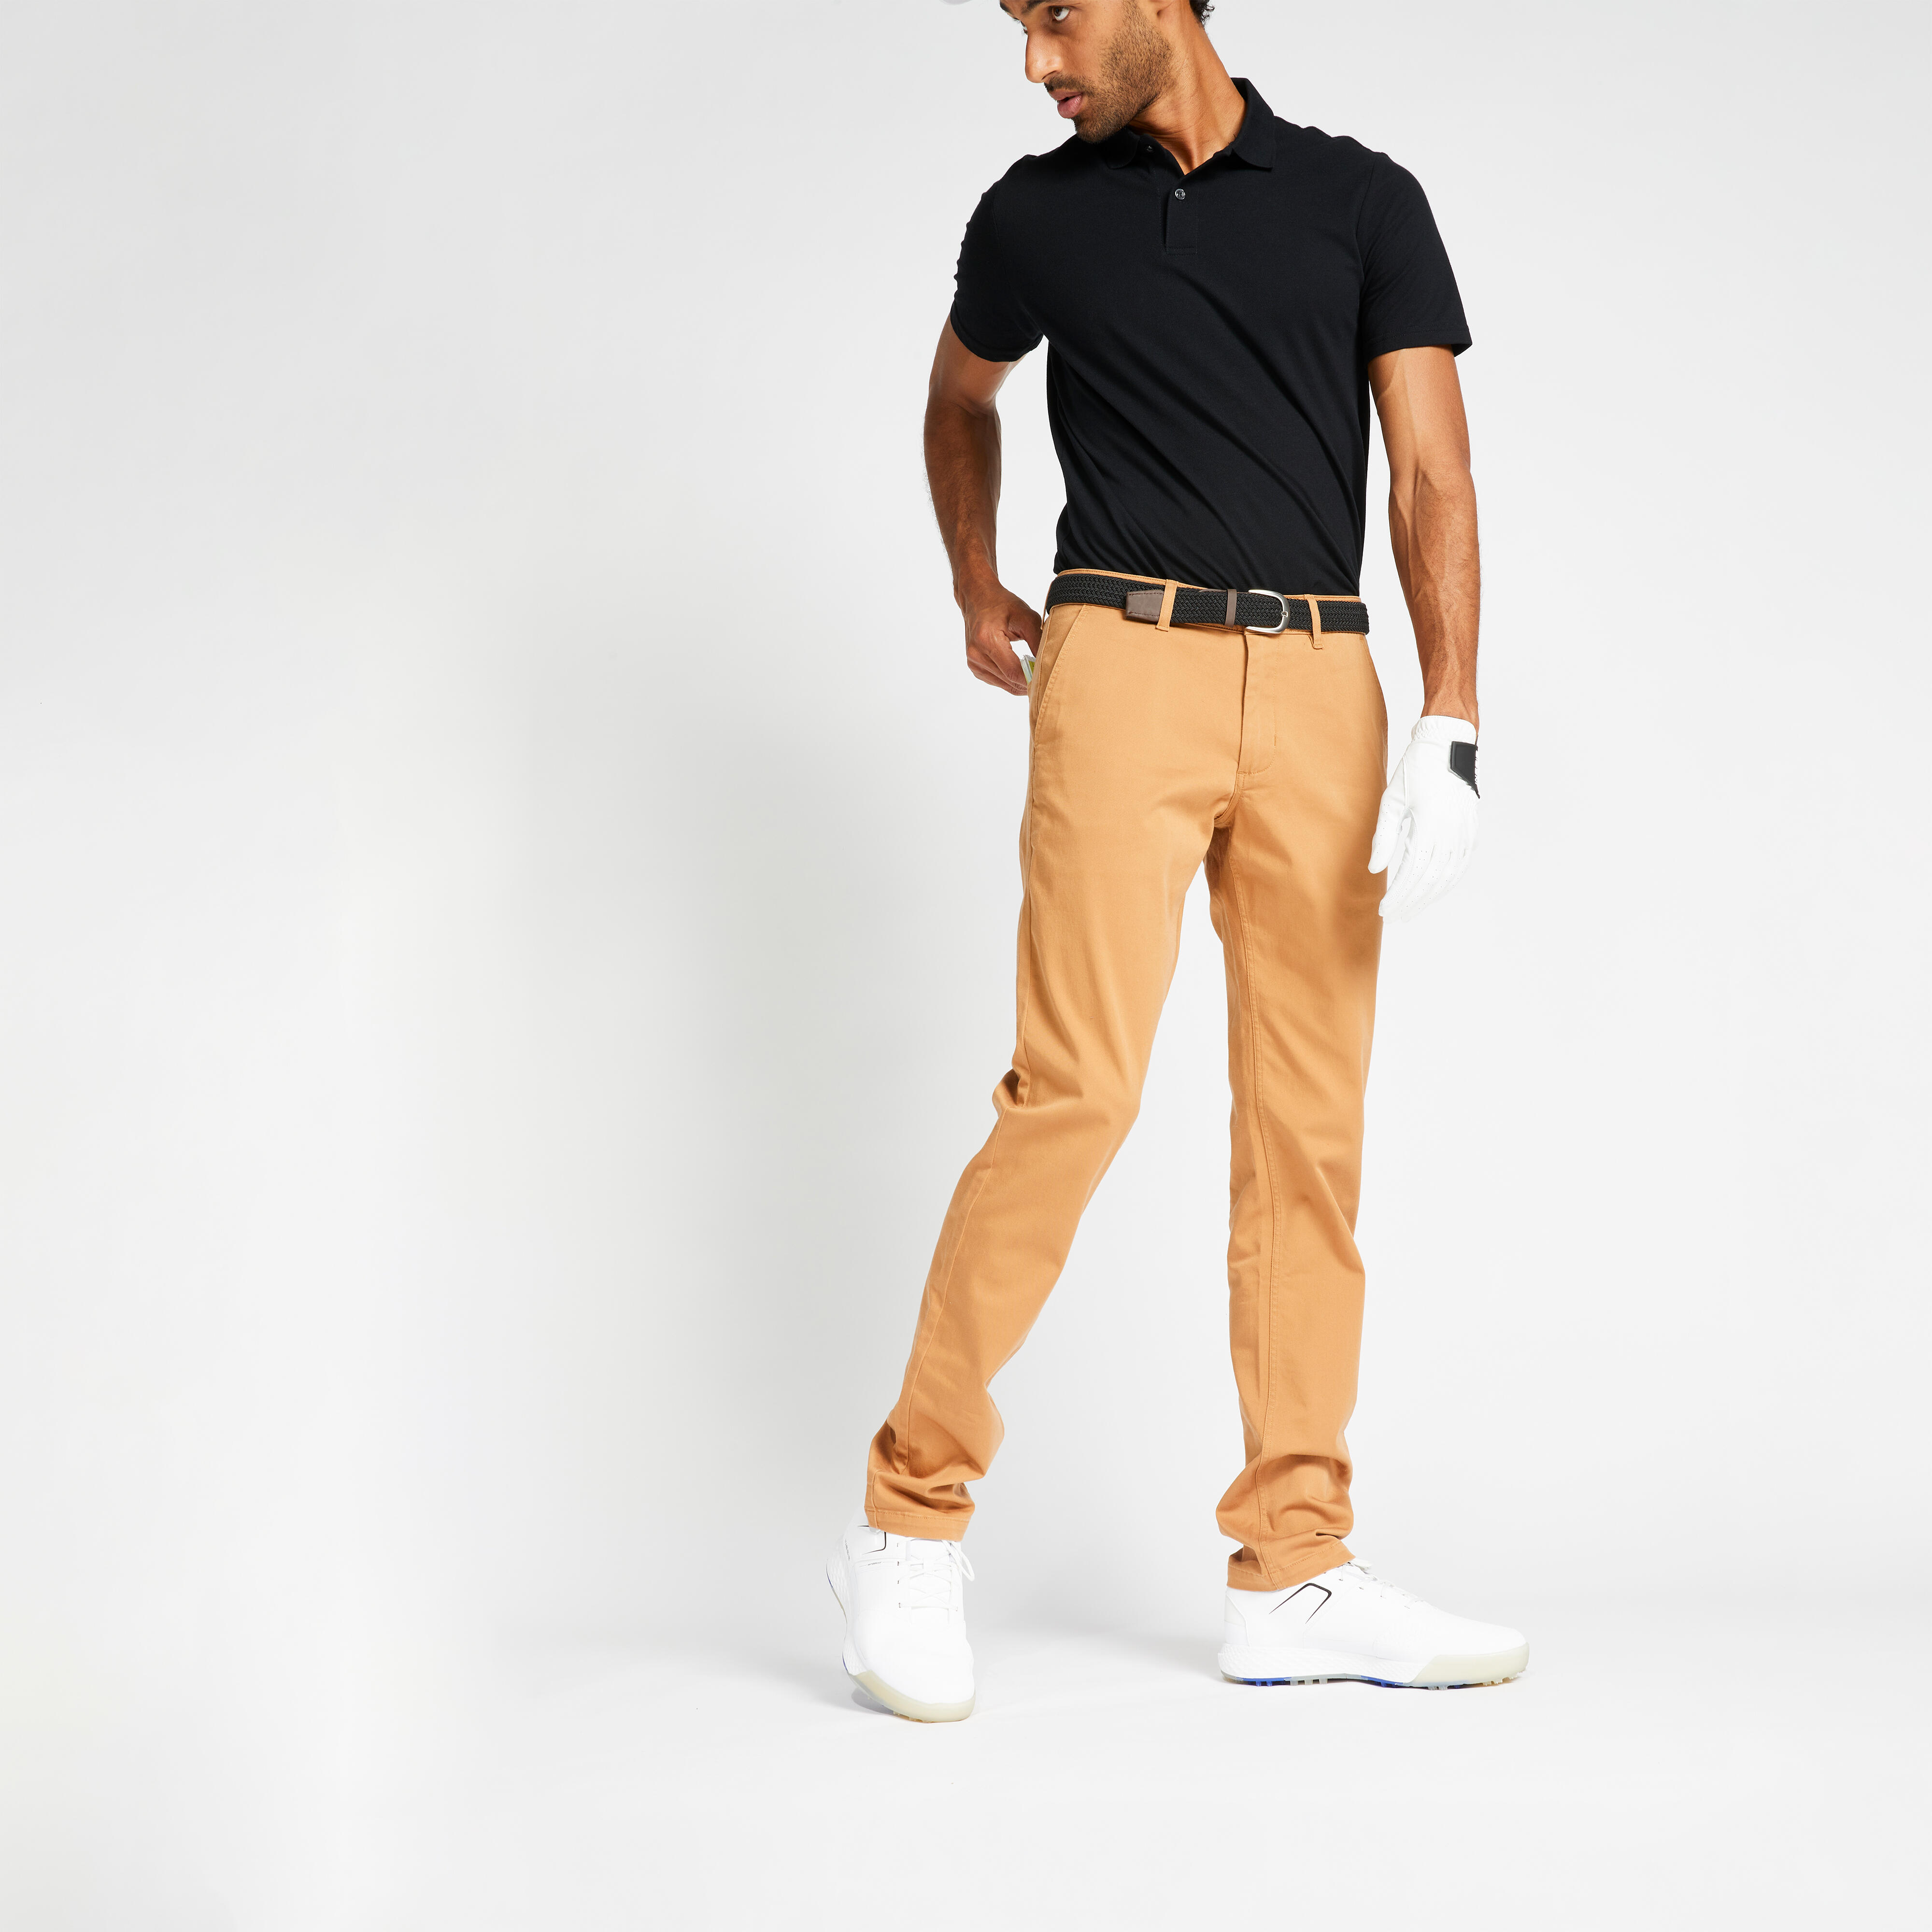 Decathlon Men Golf Trousers WW500 Navy Blue Mens Fashion Bottoms  Trousers on Carousell